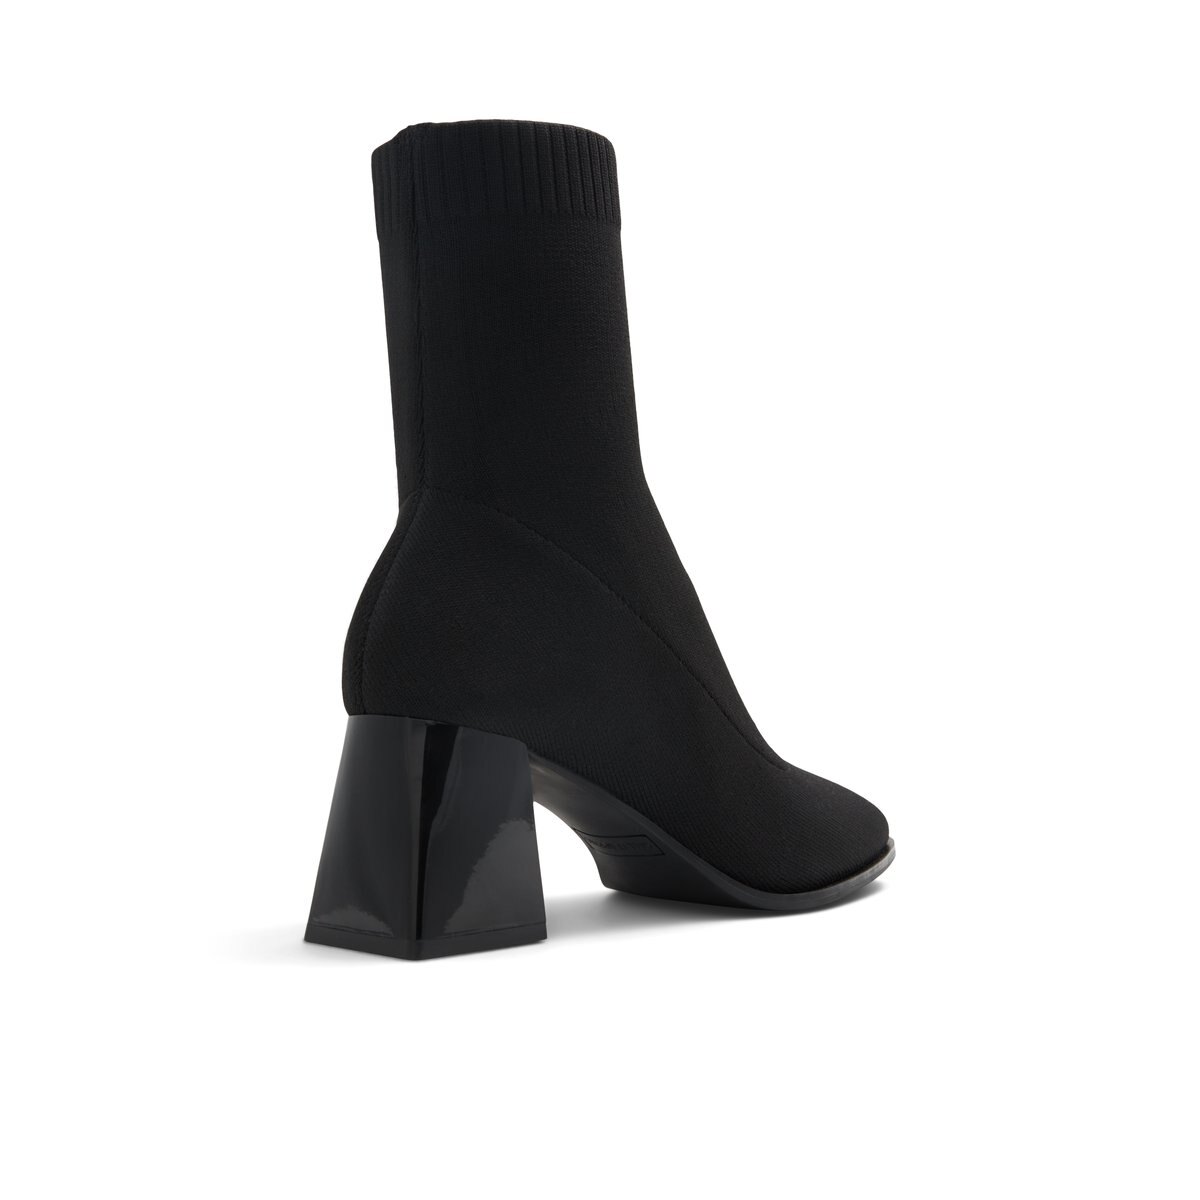 Mikenna Black Textile Knit Women's Ankle Boots | Call It Spring Canada